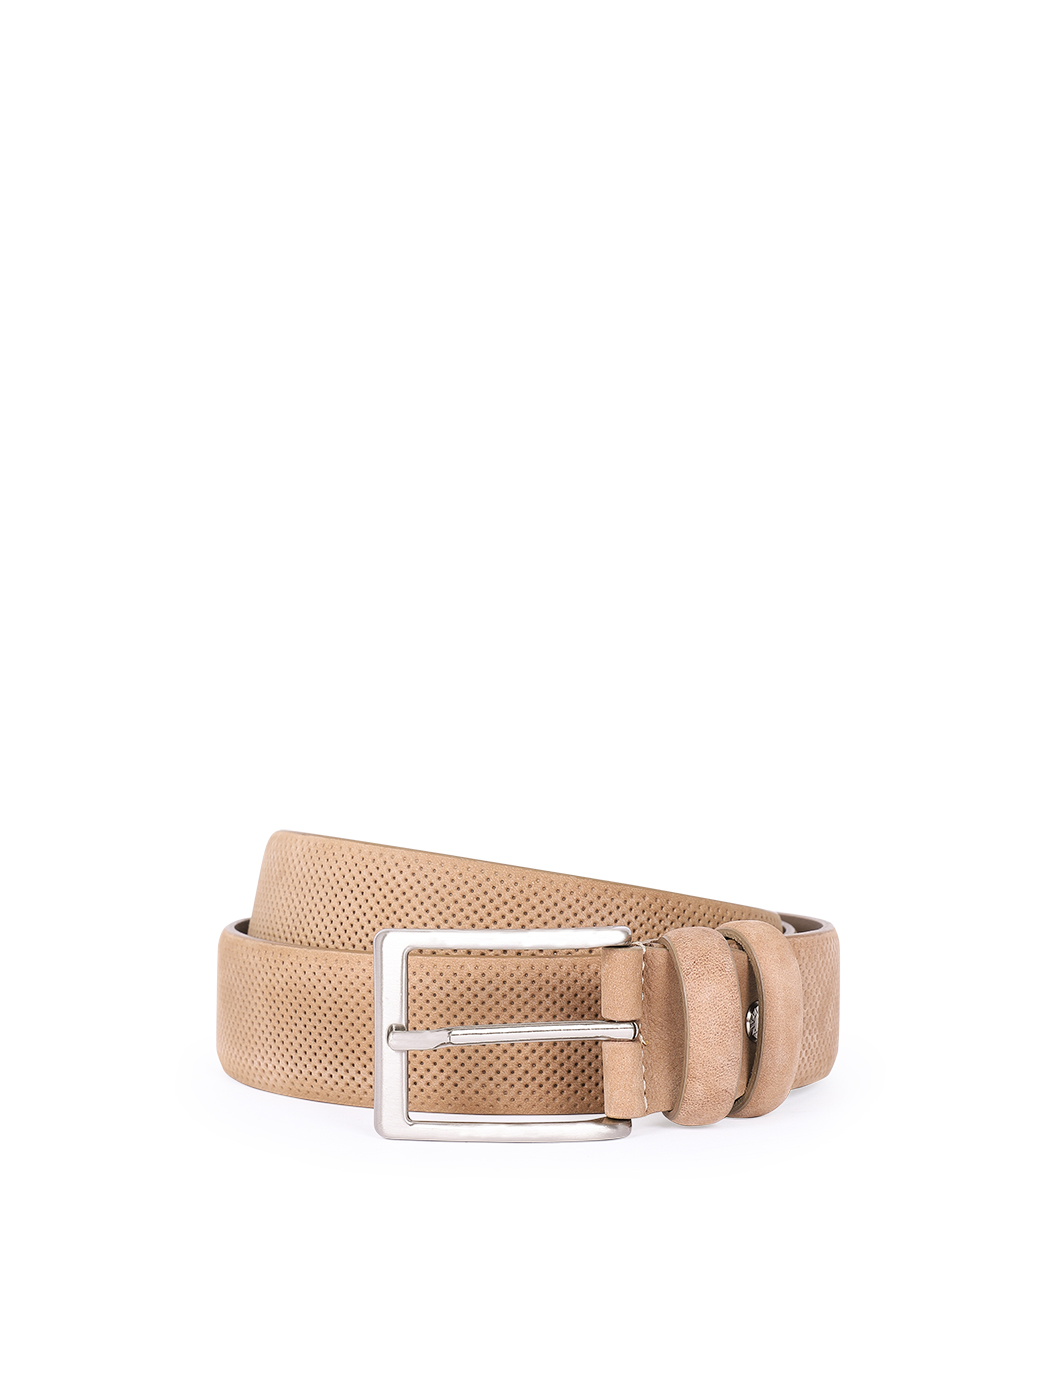 Finely dotted leather belt in taupe